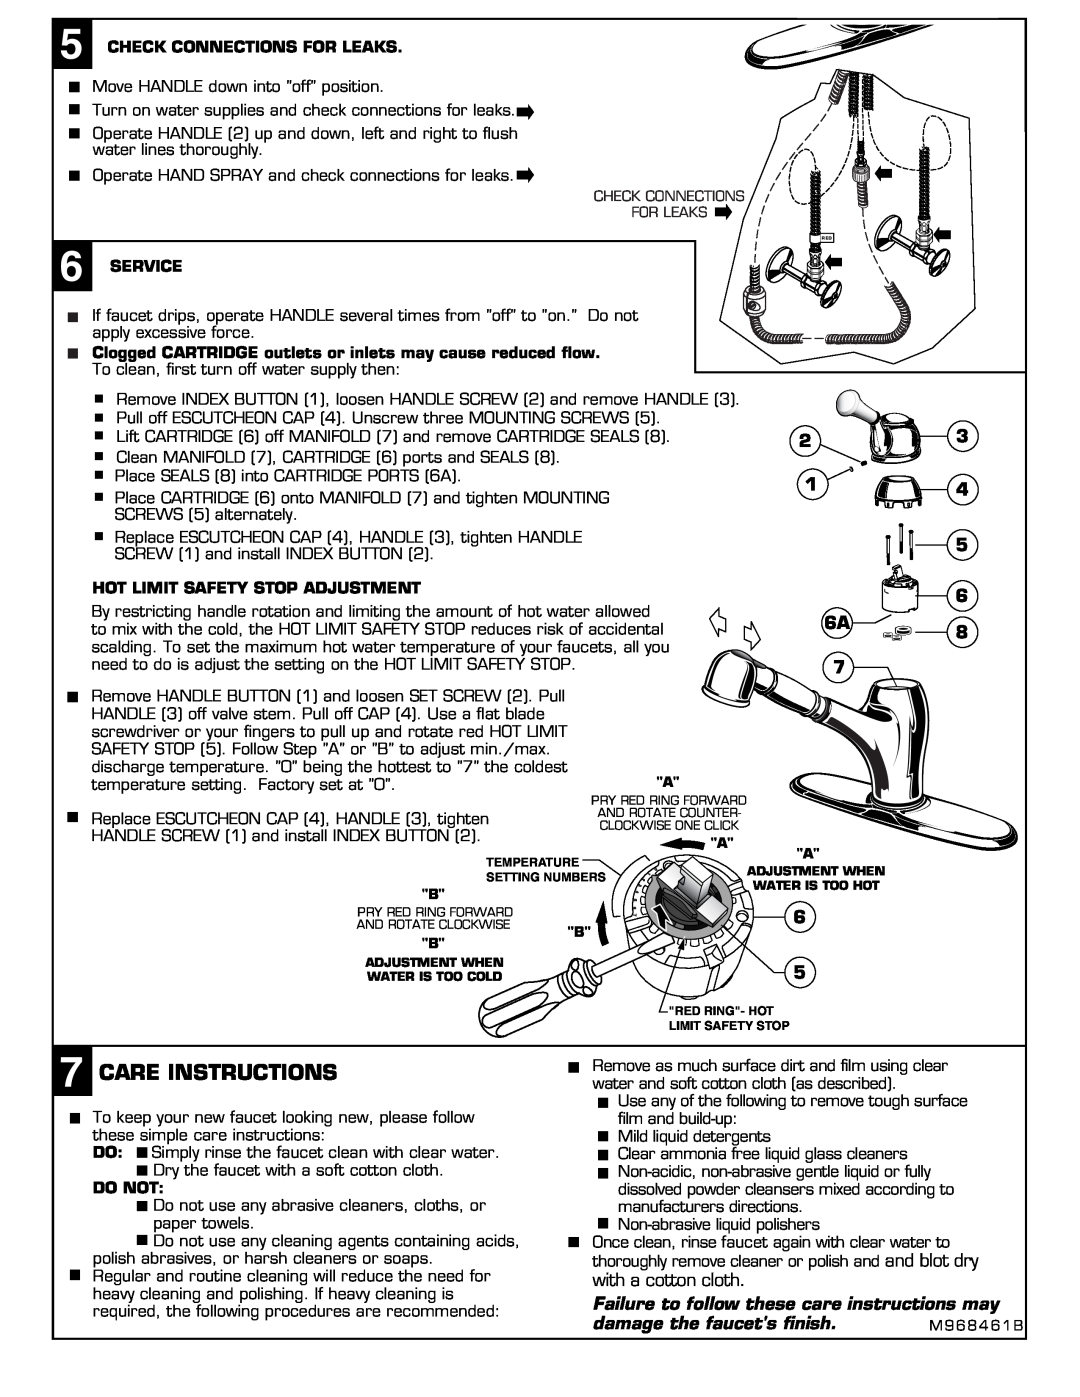 American Standard 4210 Care Instructions, 5 6 6A, with a cotton cloth, Check Connections For Leaks, Service, Do Not 